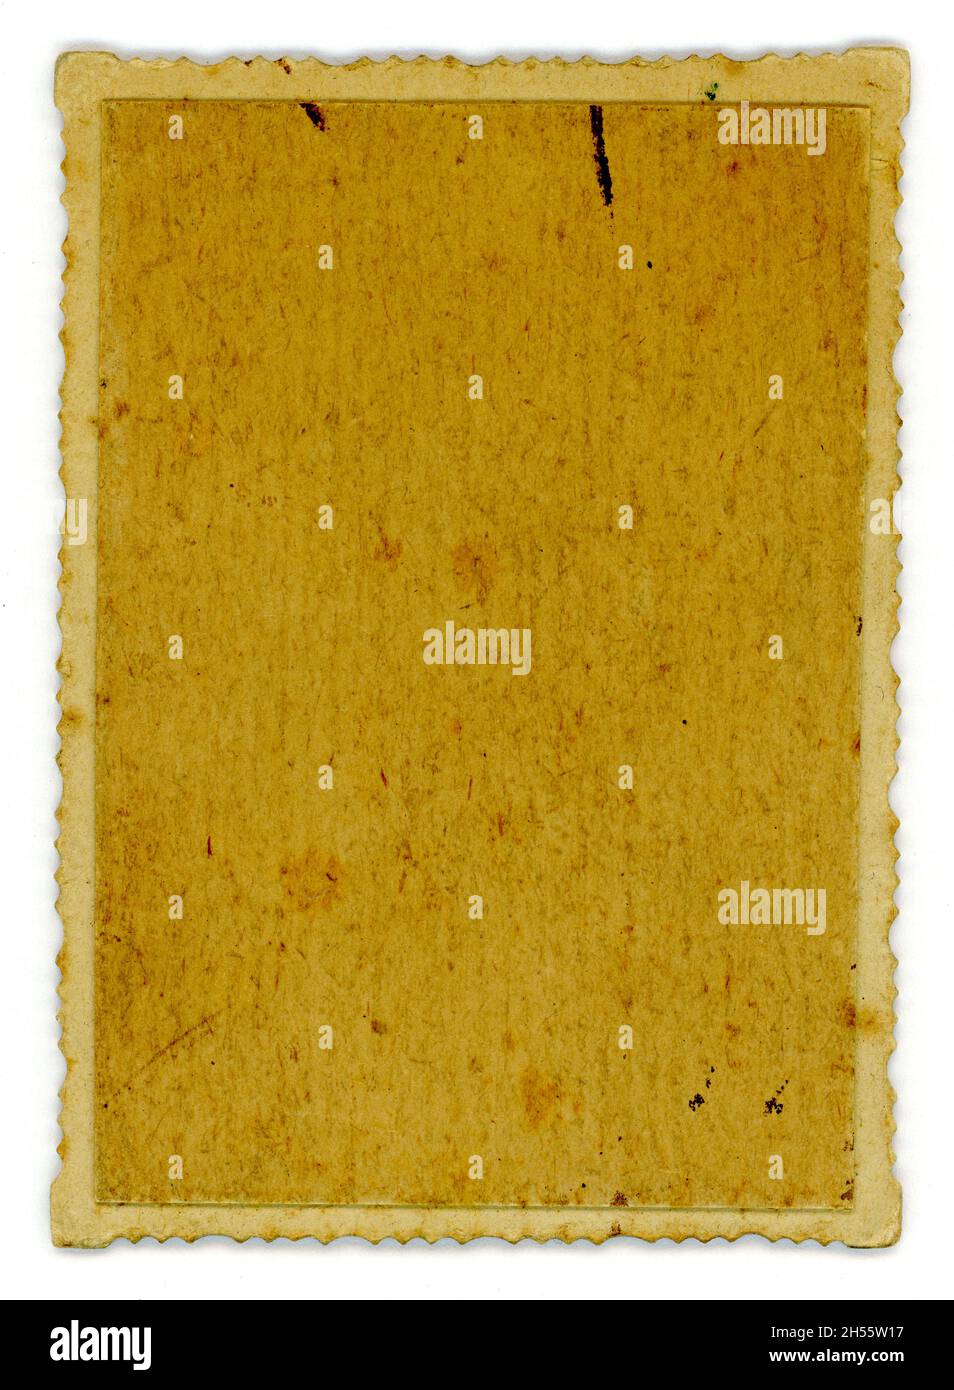 Reverse of Edwardian era miniature photograph, cardboard mount, with textured paper showing wood fibres, scalloped edge, U.K. circa 1900 or1901 Stock Photo